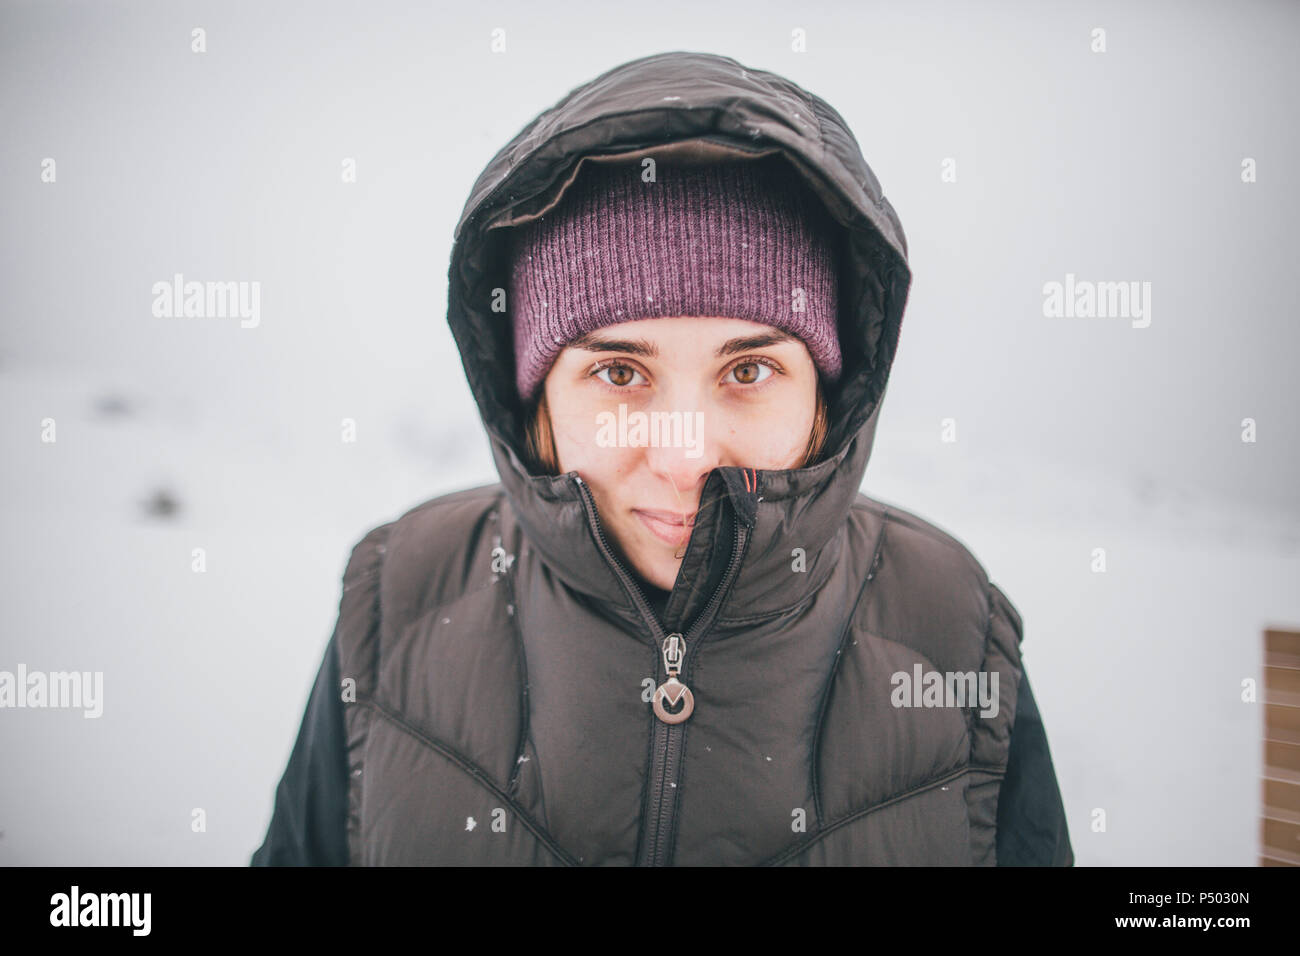 Austria, Kitzbuehel, portrait of smiling young woman in winter Stock Photo